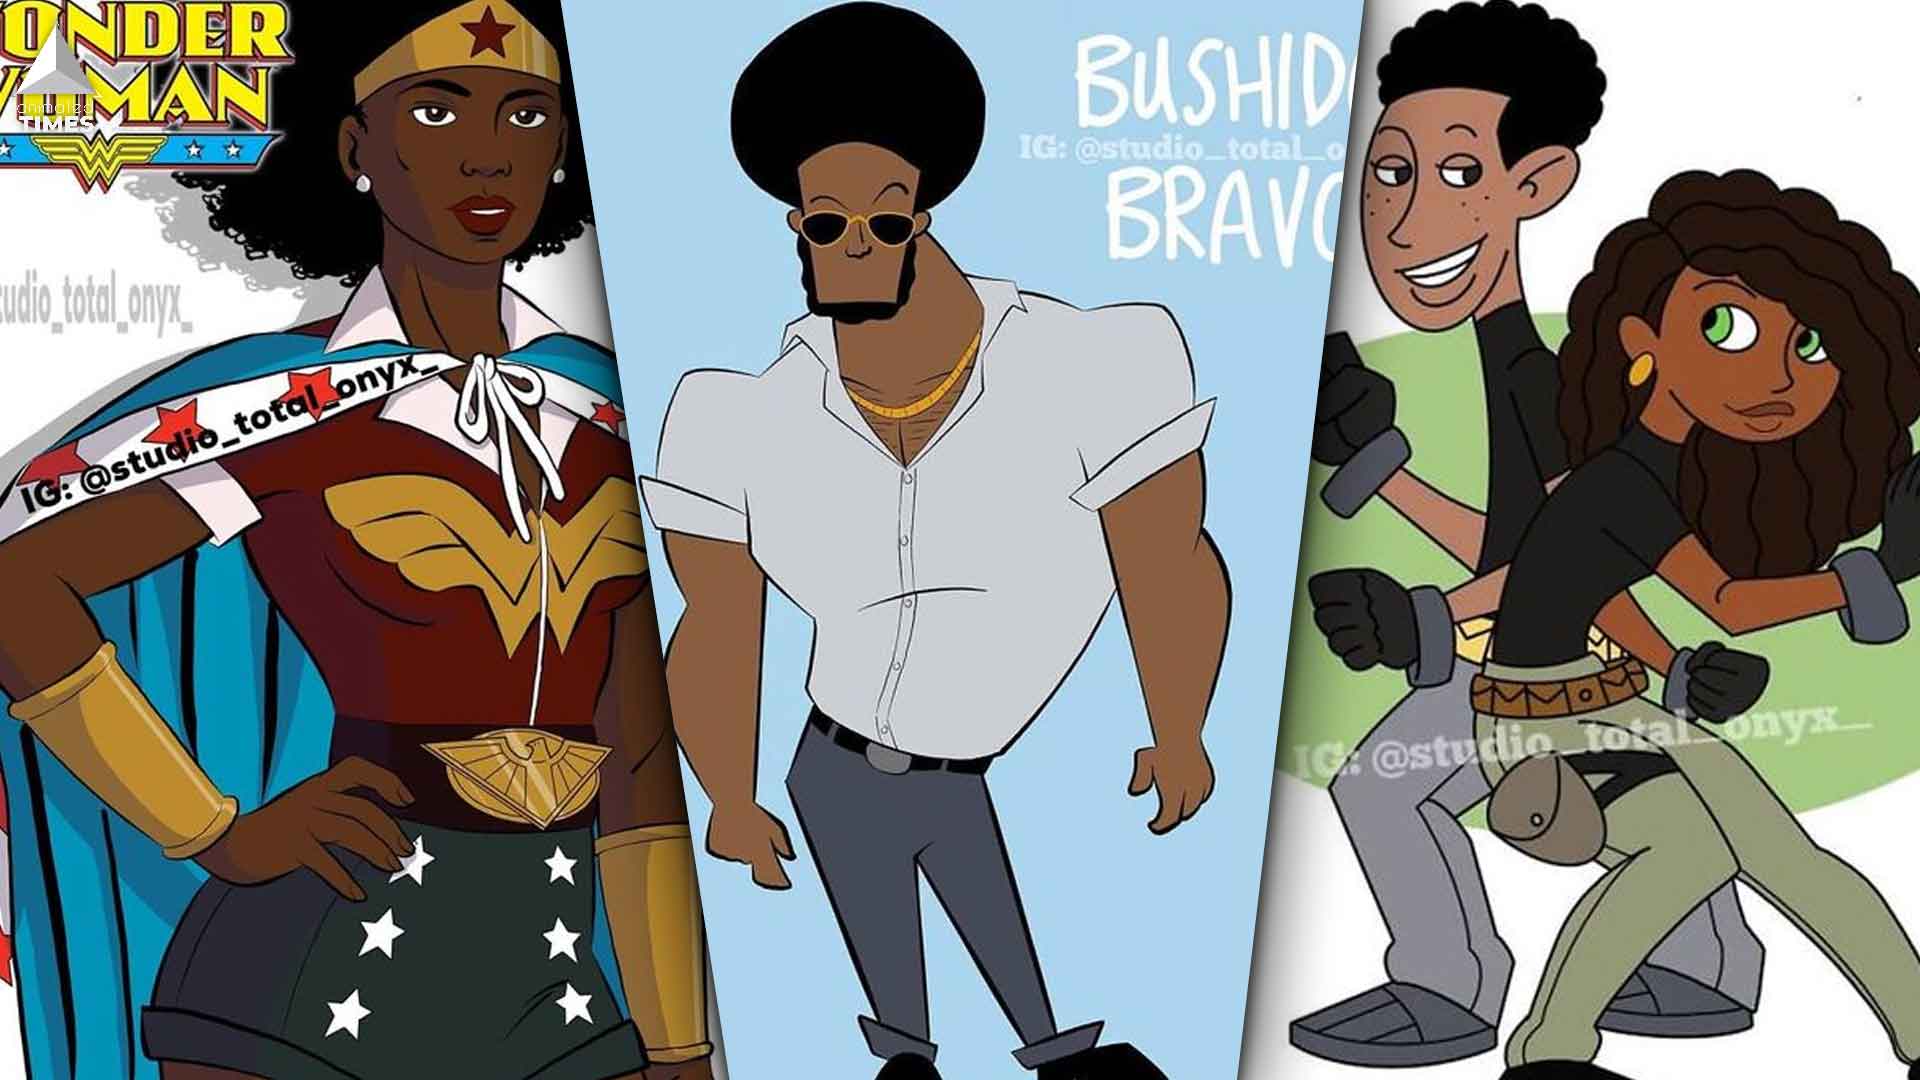 An Artist Reconsiders Popular Cartoons With Black Characters To Raise Awareness